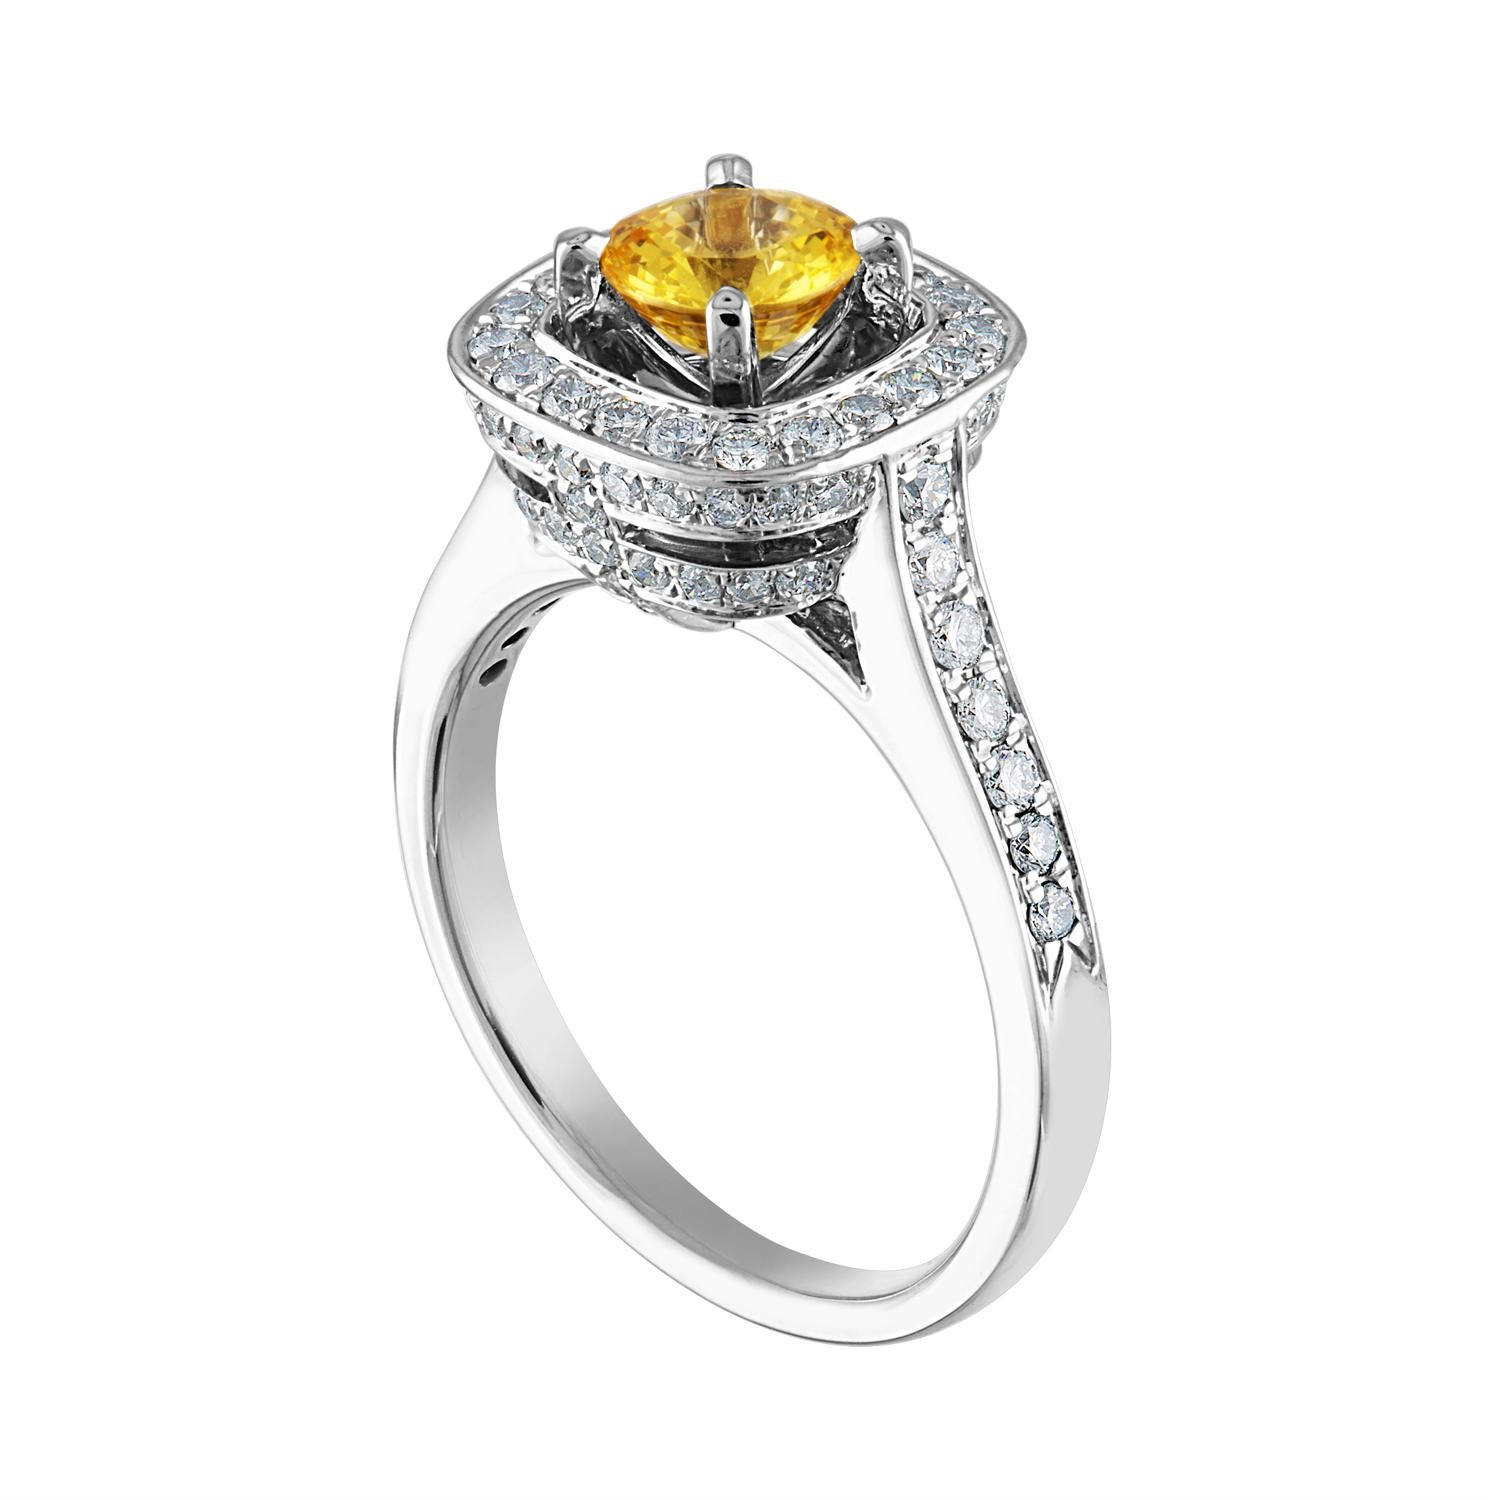 Beautiful Square Halo Ring
The ring is 18K White Gold
The Center Stone is a Round Yellow Sapphire 0.92 Carats
The Sapphire is AGL Certified Heated
There are 0.69 Carats in Diamonds F/G VS/SI
The ring is a size 7.25, sizable.
The ring weighs 6.2 grams